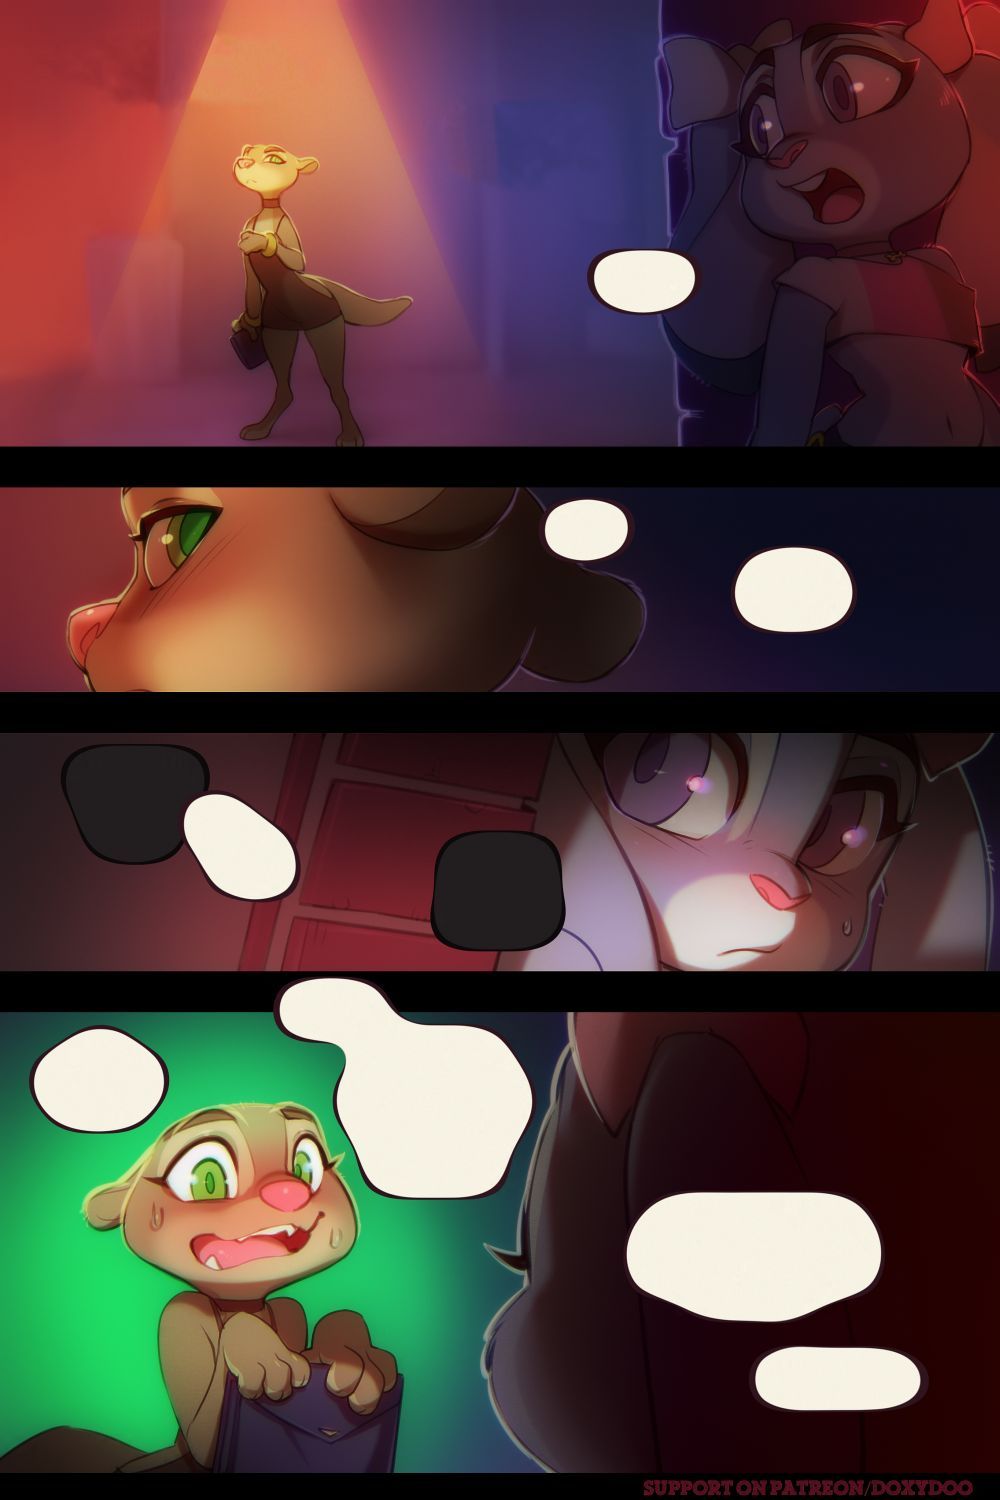 [Doxy] Sweet Sting Part 2: Down The Rabbit Hole (Zootopia) [Textless] [Ongoing] 8